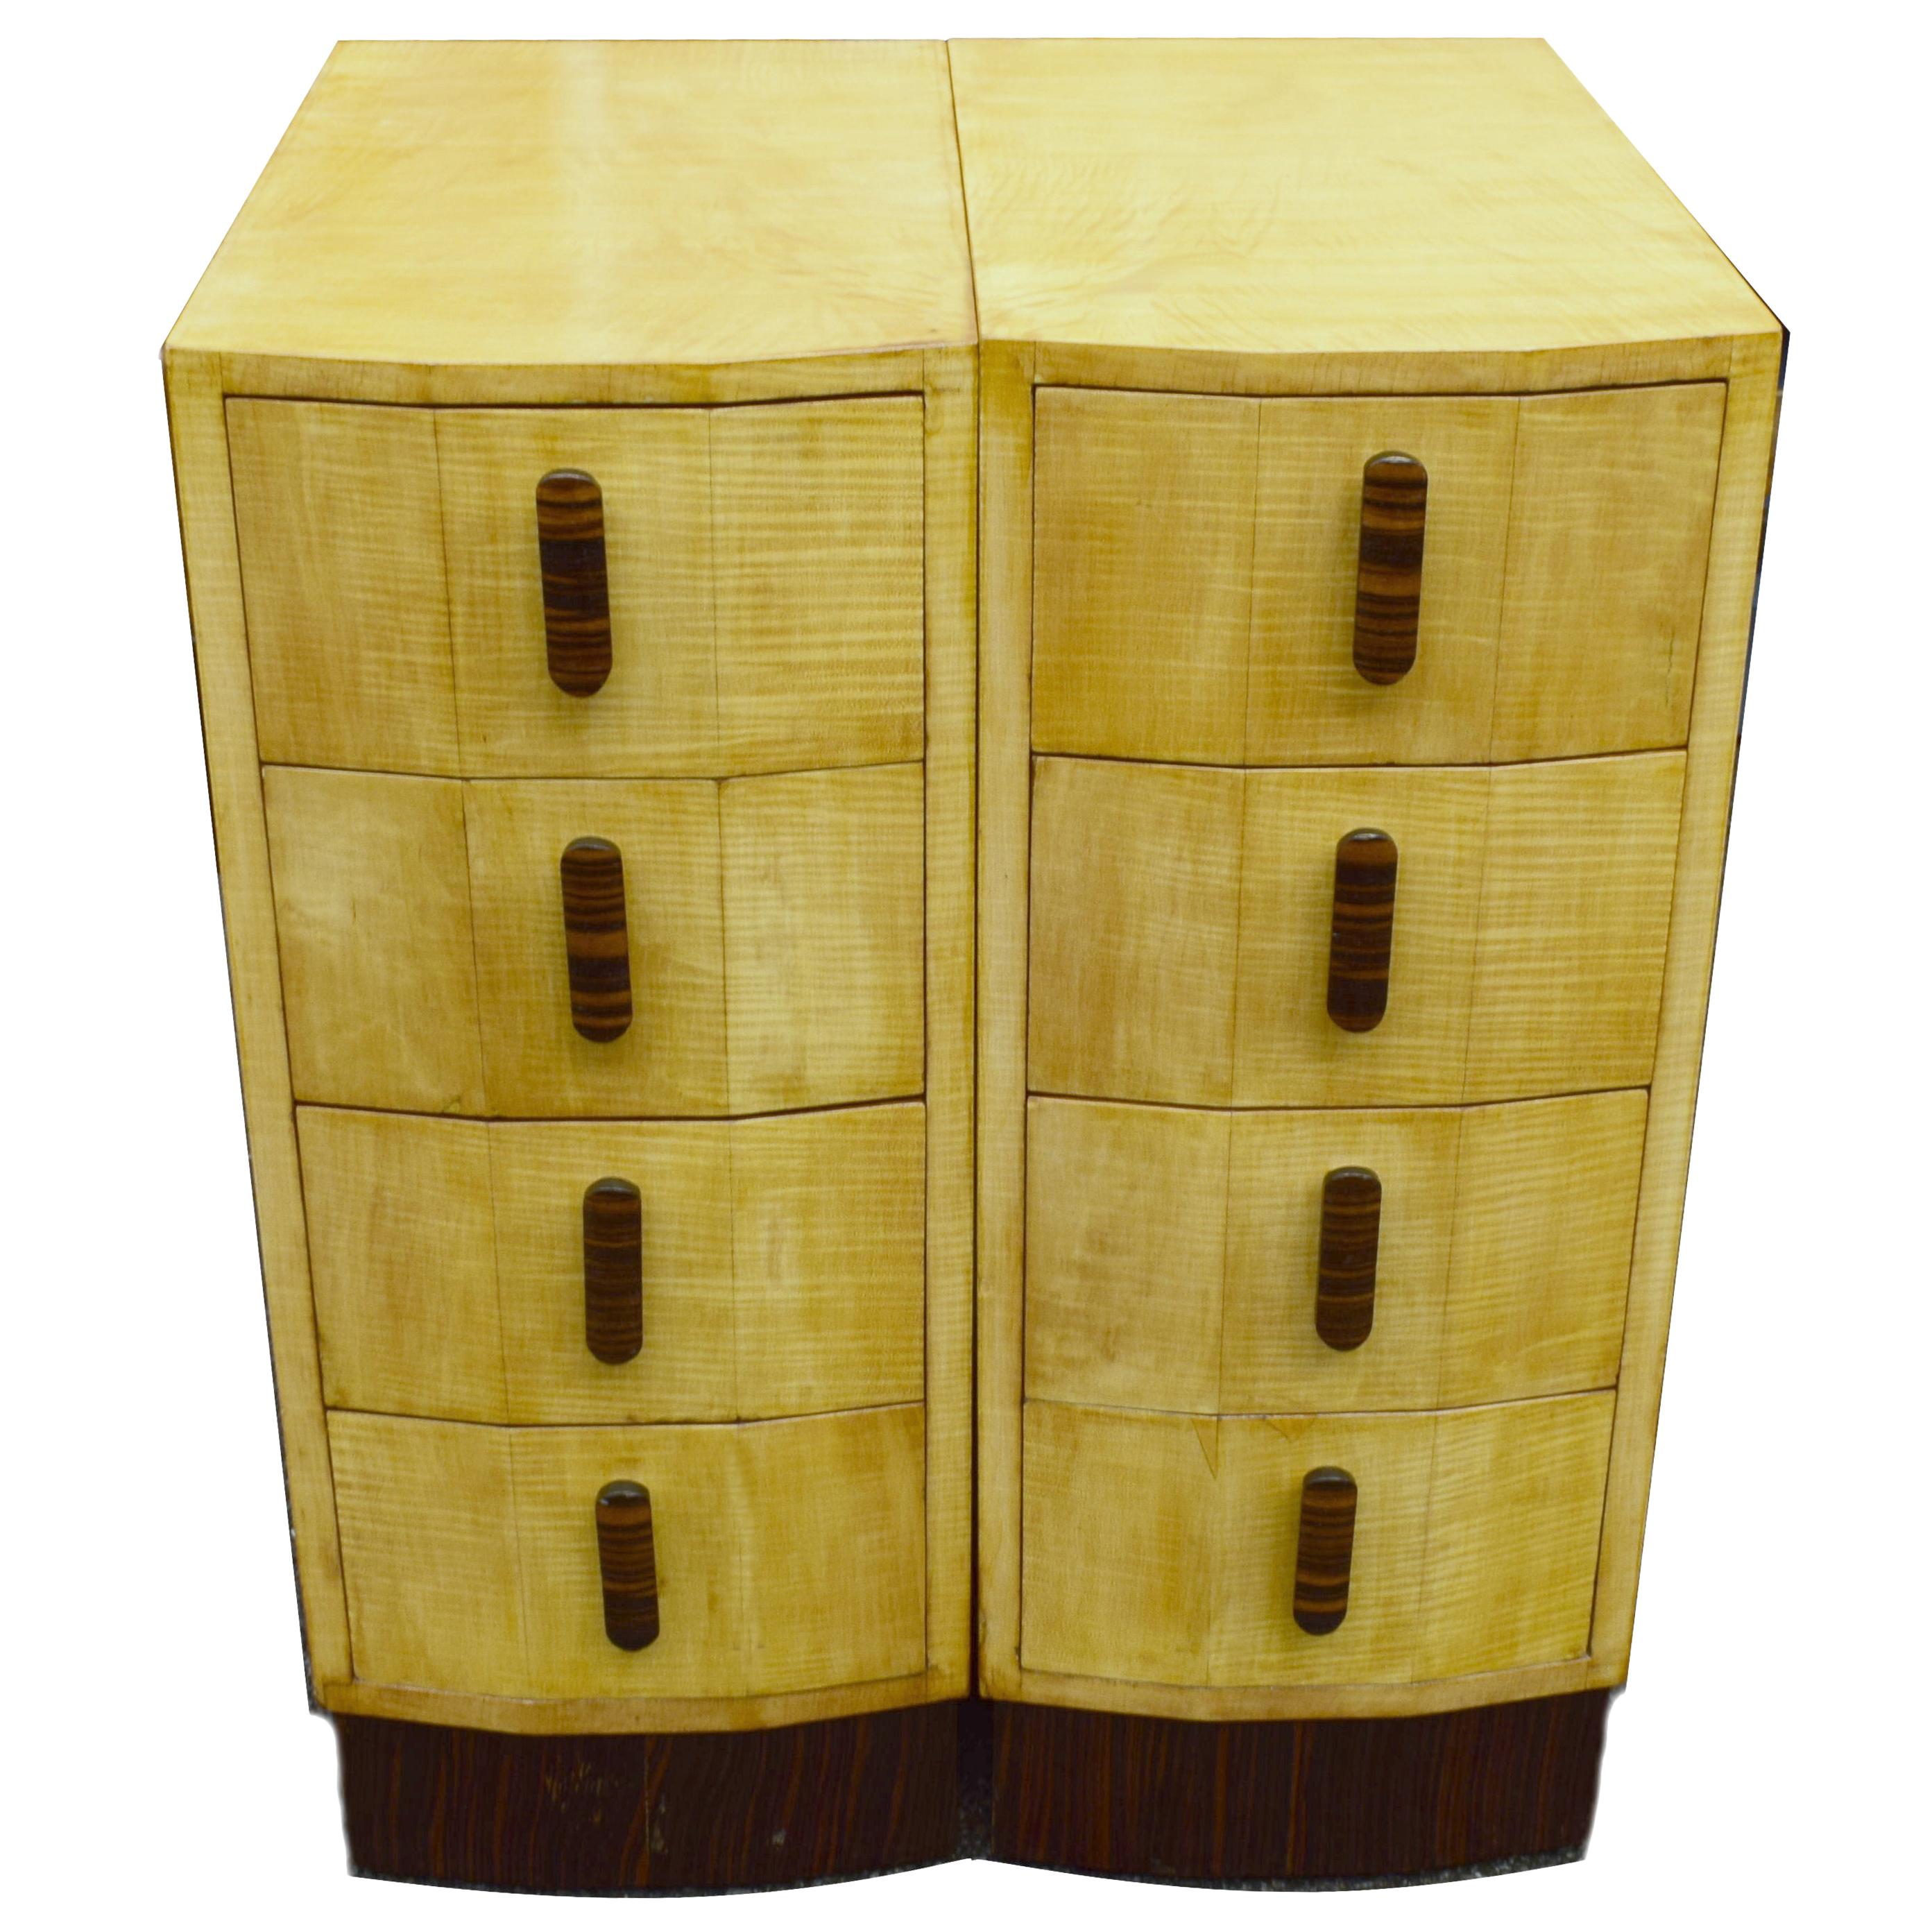 Matching Pair of Bleached Blonde Art Deco Nightstand Cabinets